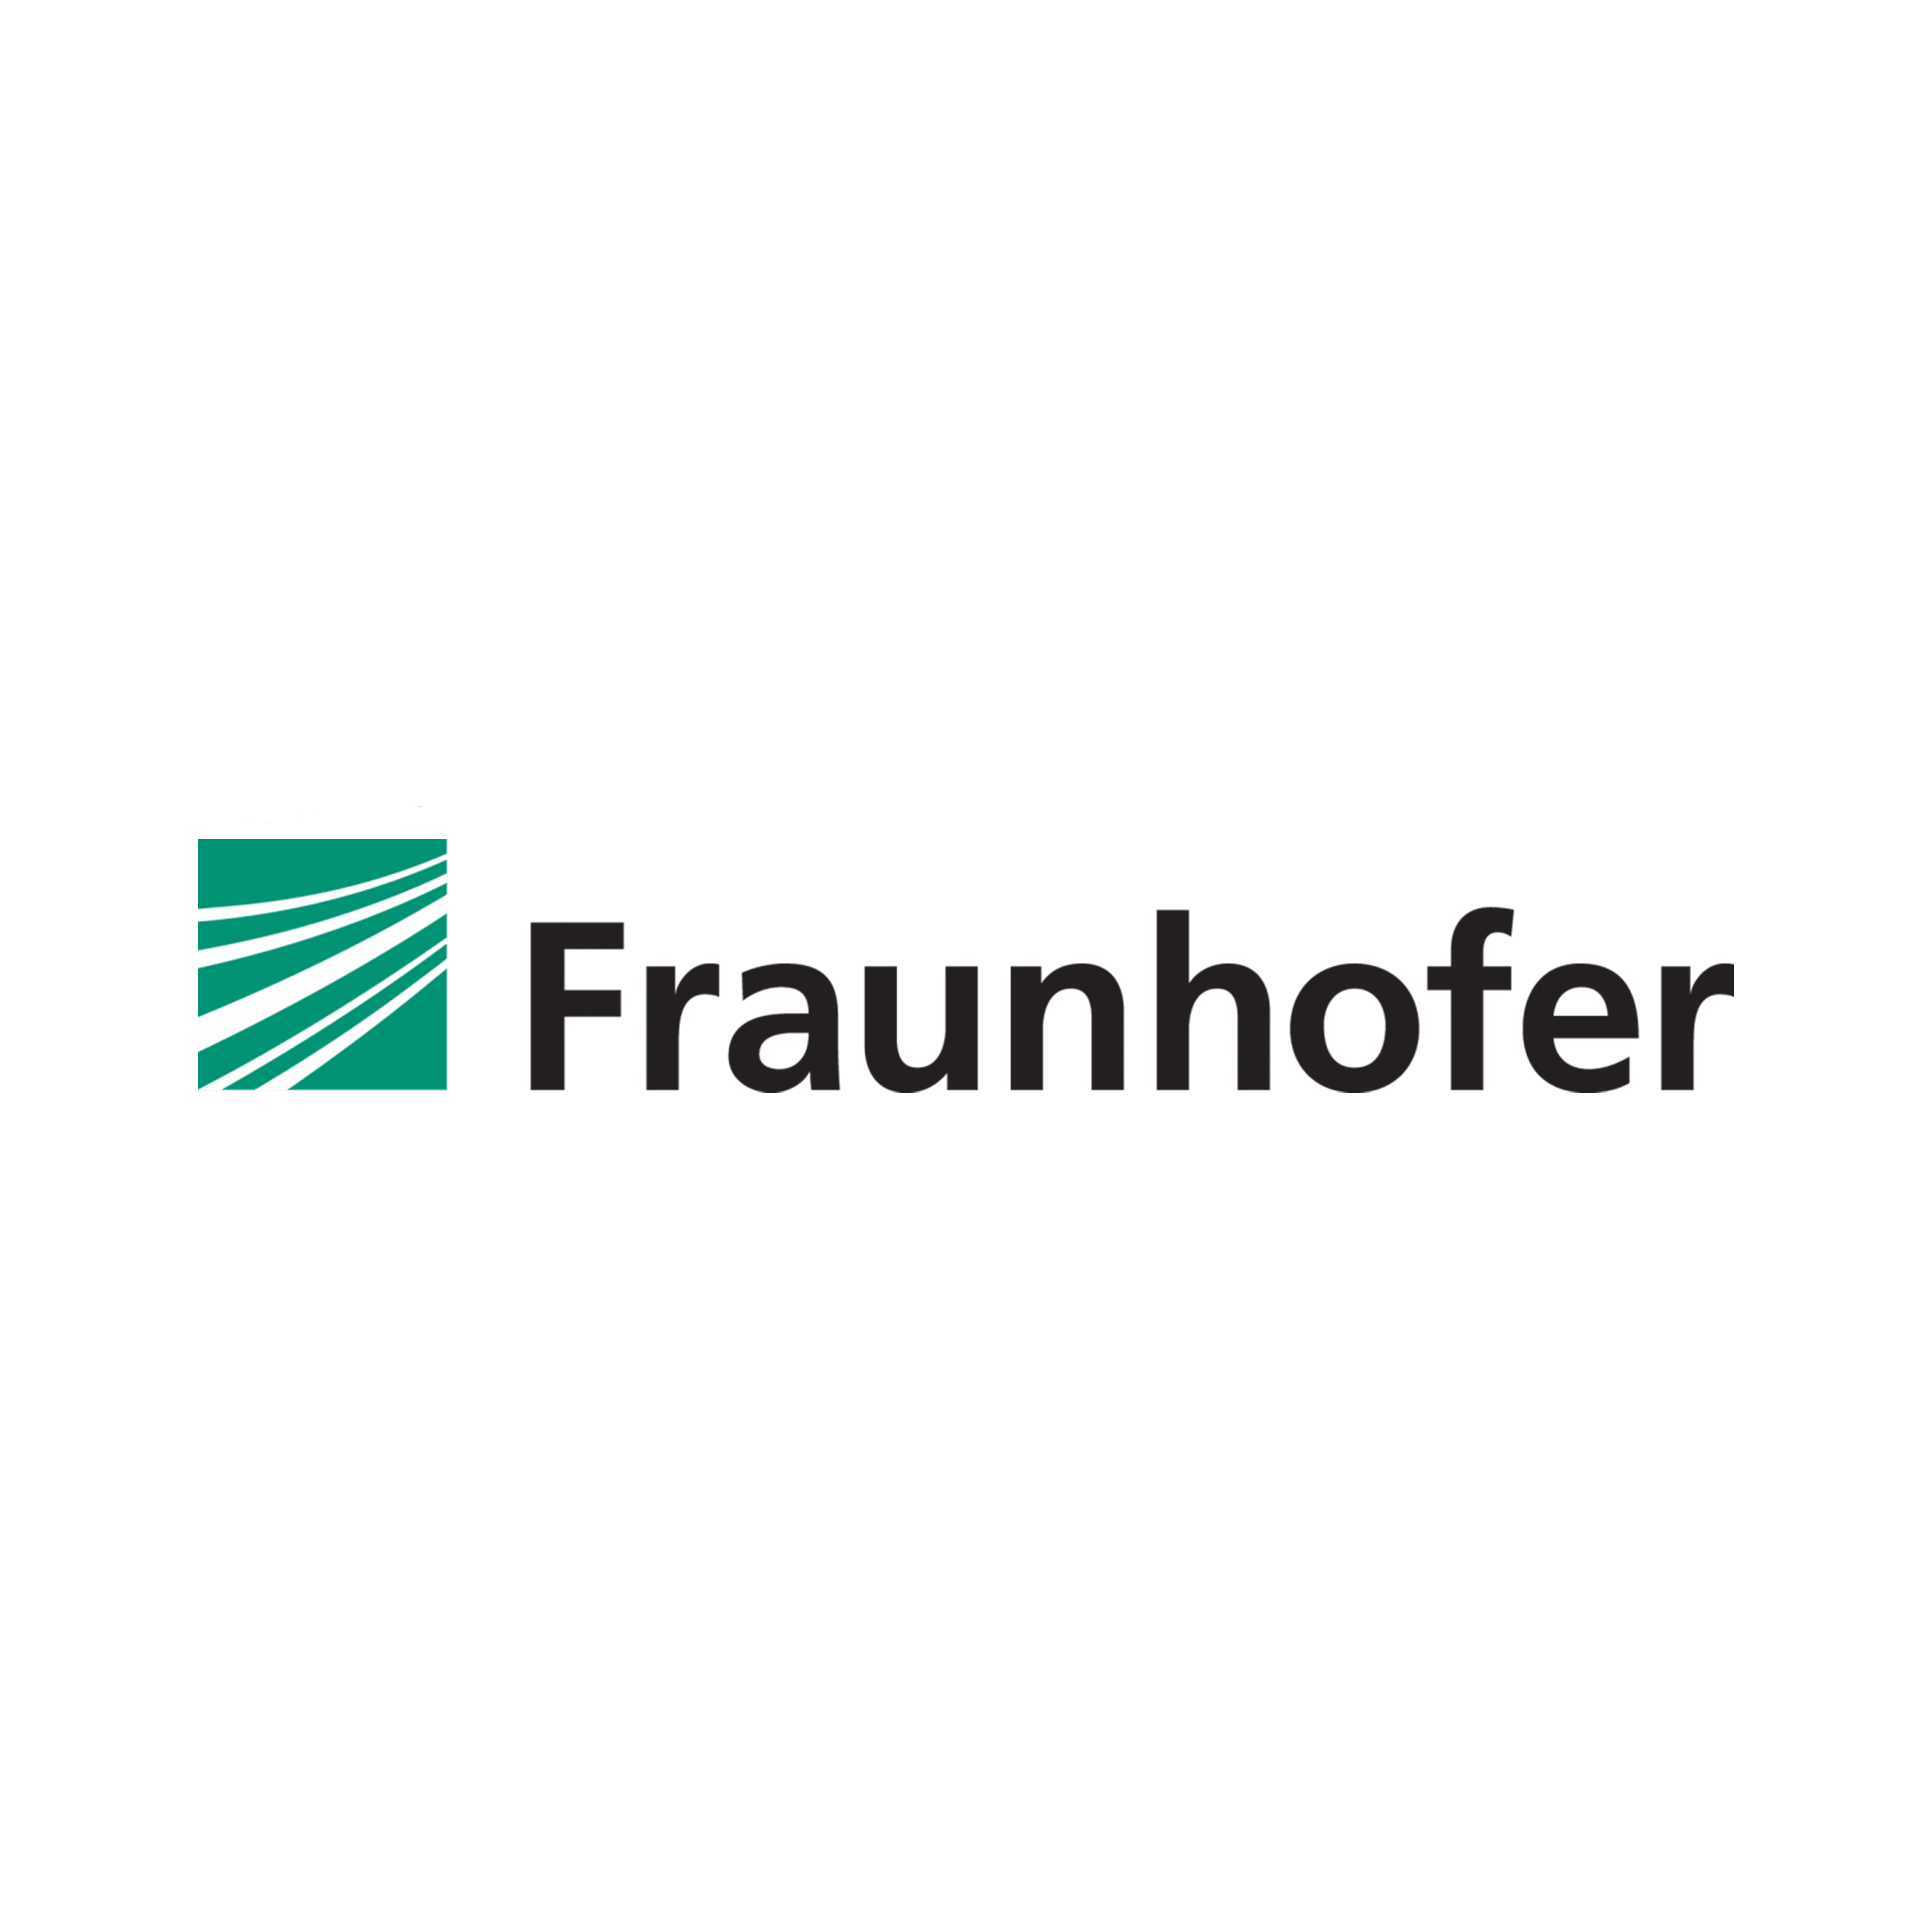 Green logo, Fraunhofer in black text to right